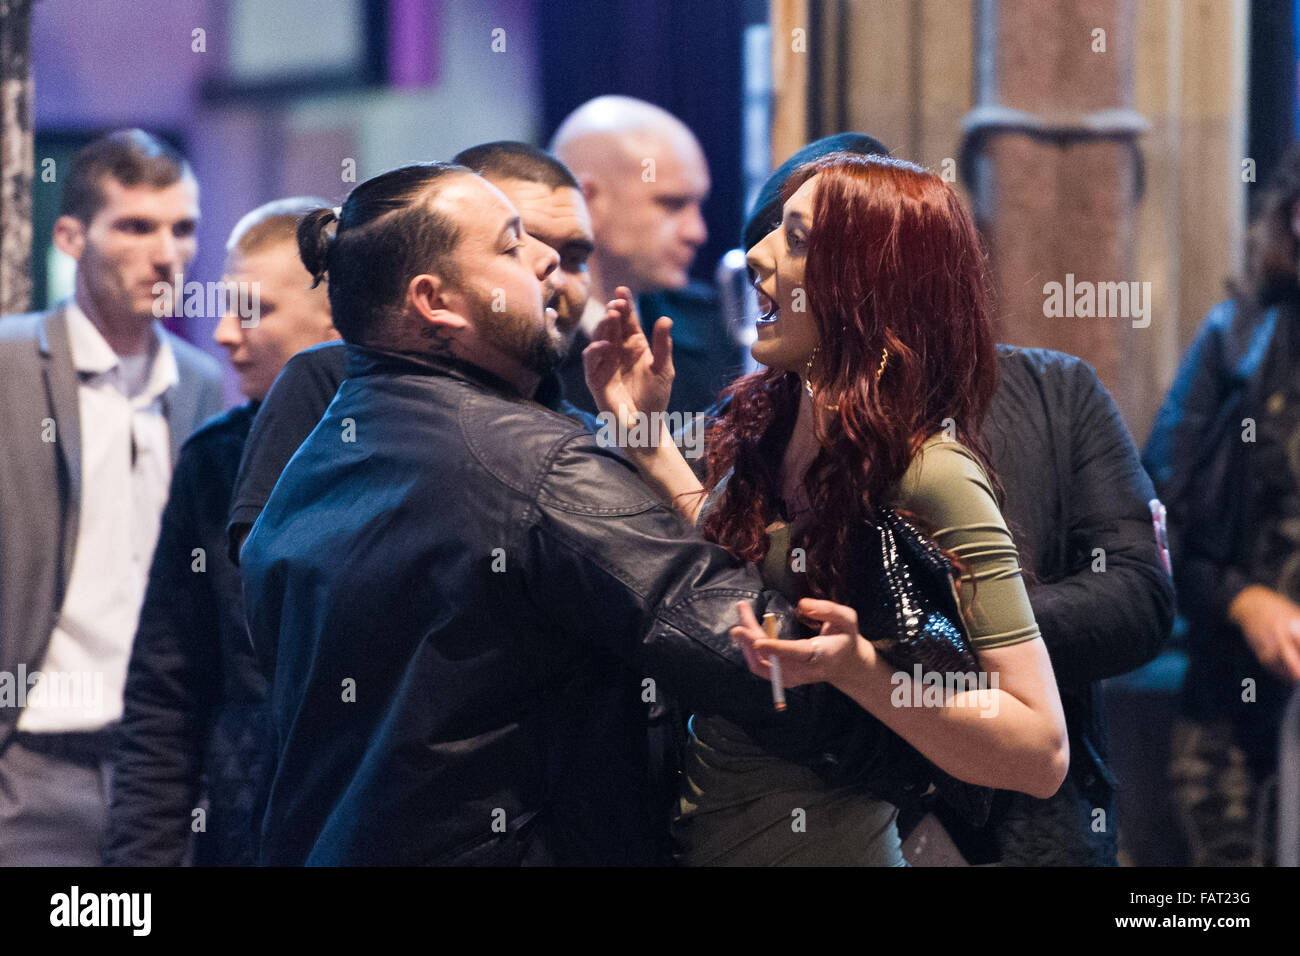 Pictured: A woman has an altercation with a nightclub bouncer. Re: New Year's Eve in Cardiff, South Wales, UK. Early hours of Fr Stock Photo